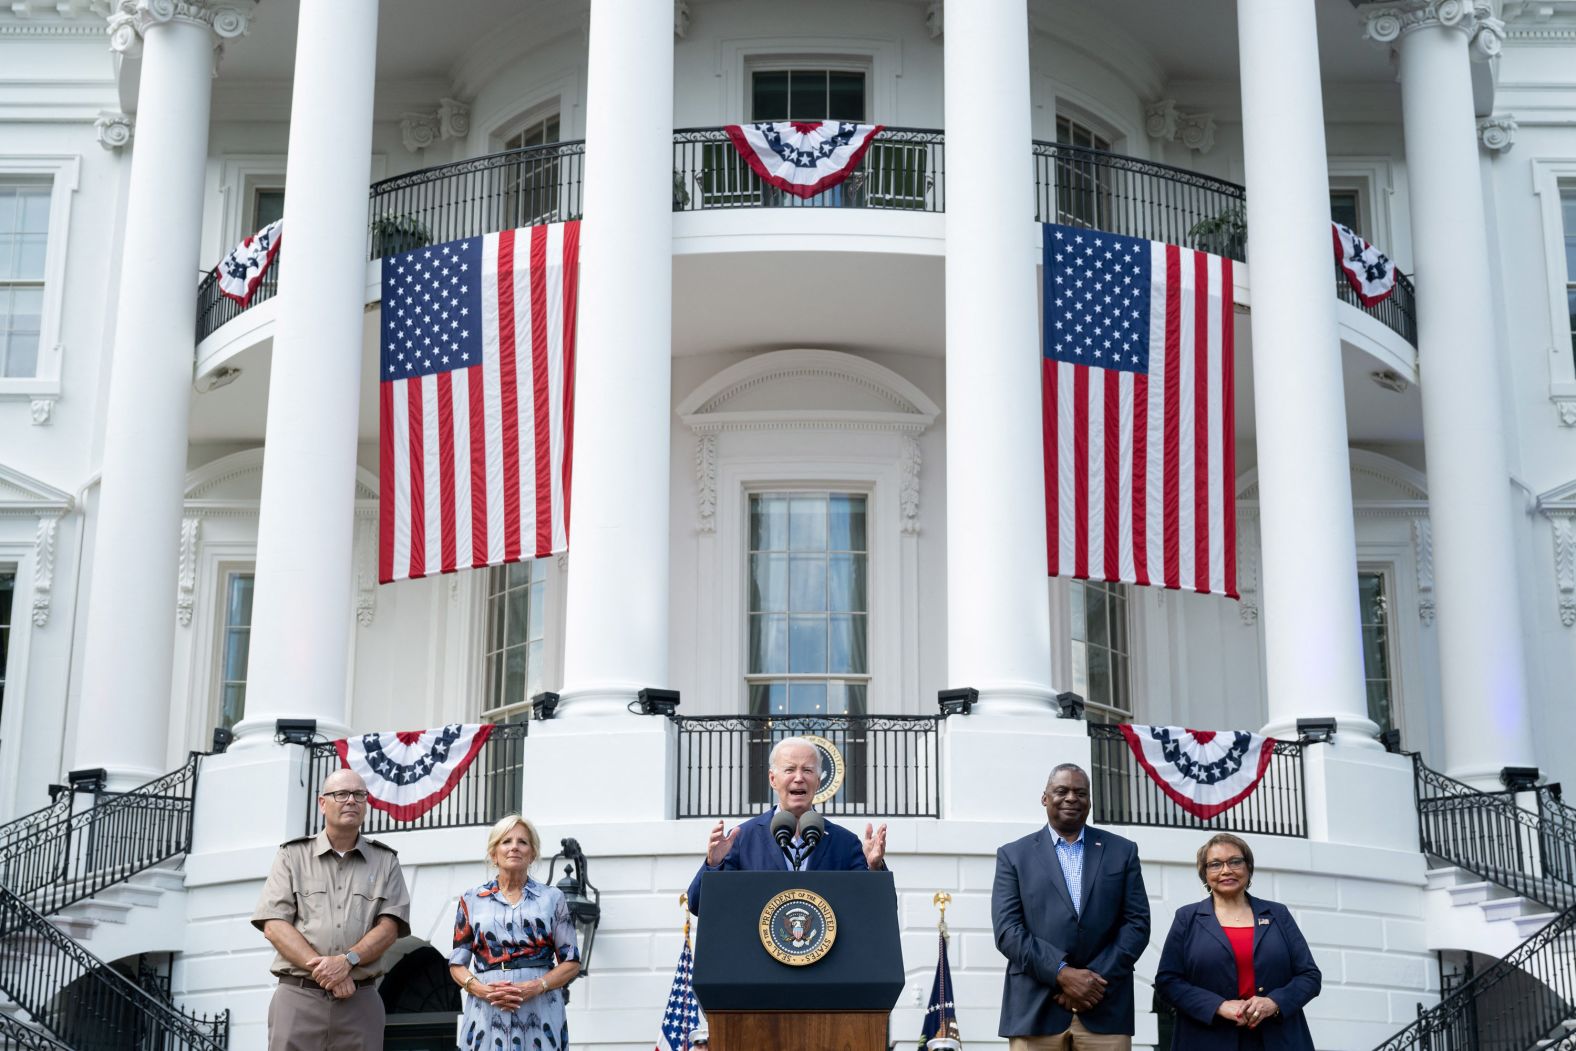 President Joe Biden speaks in front of the White House during a barbecue held for military families on Tuesday.